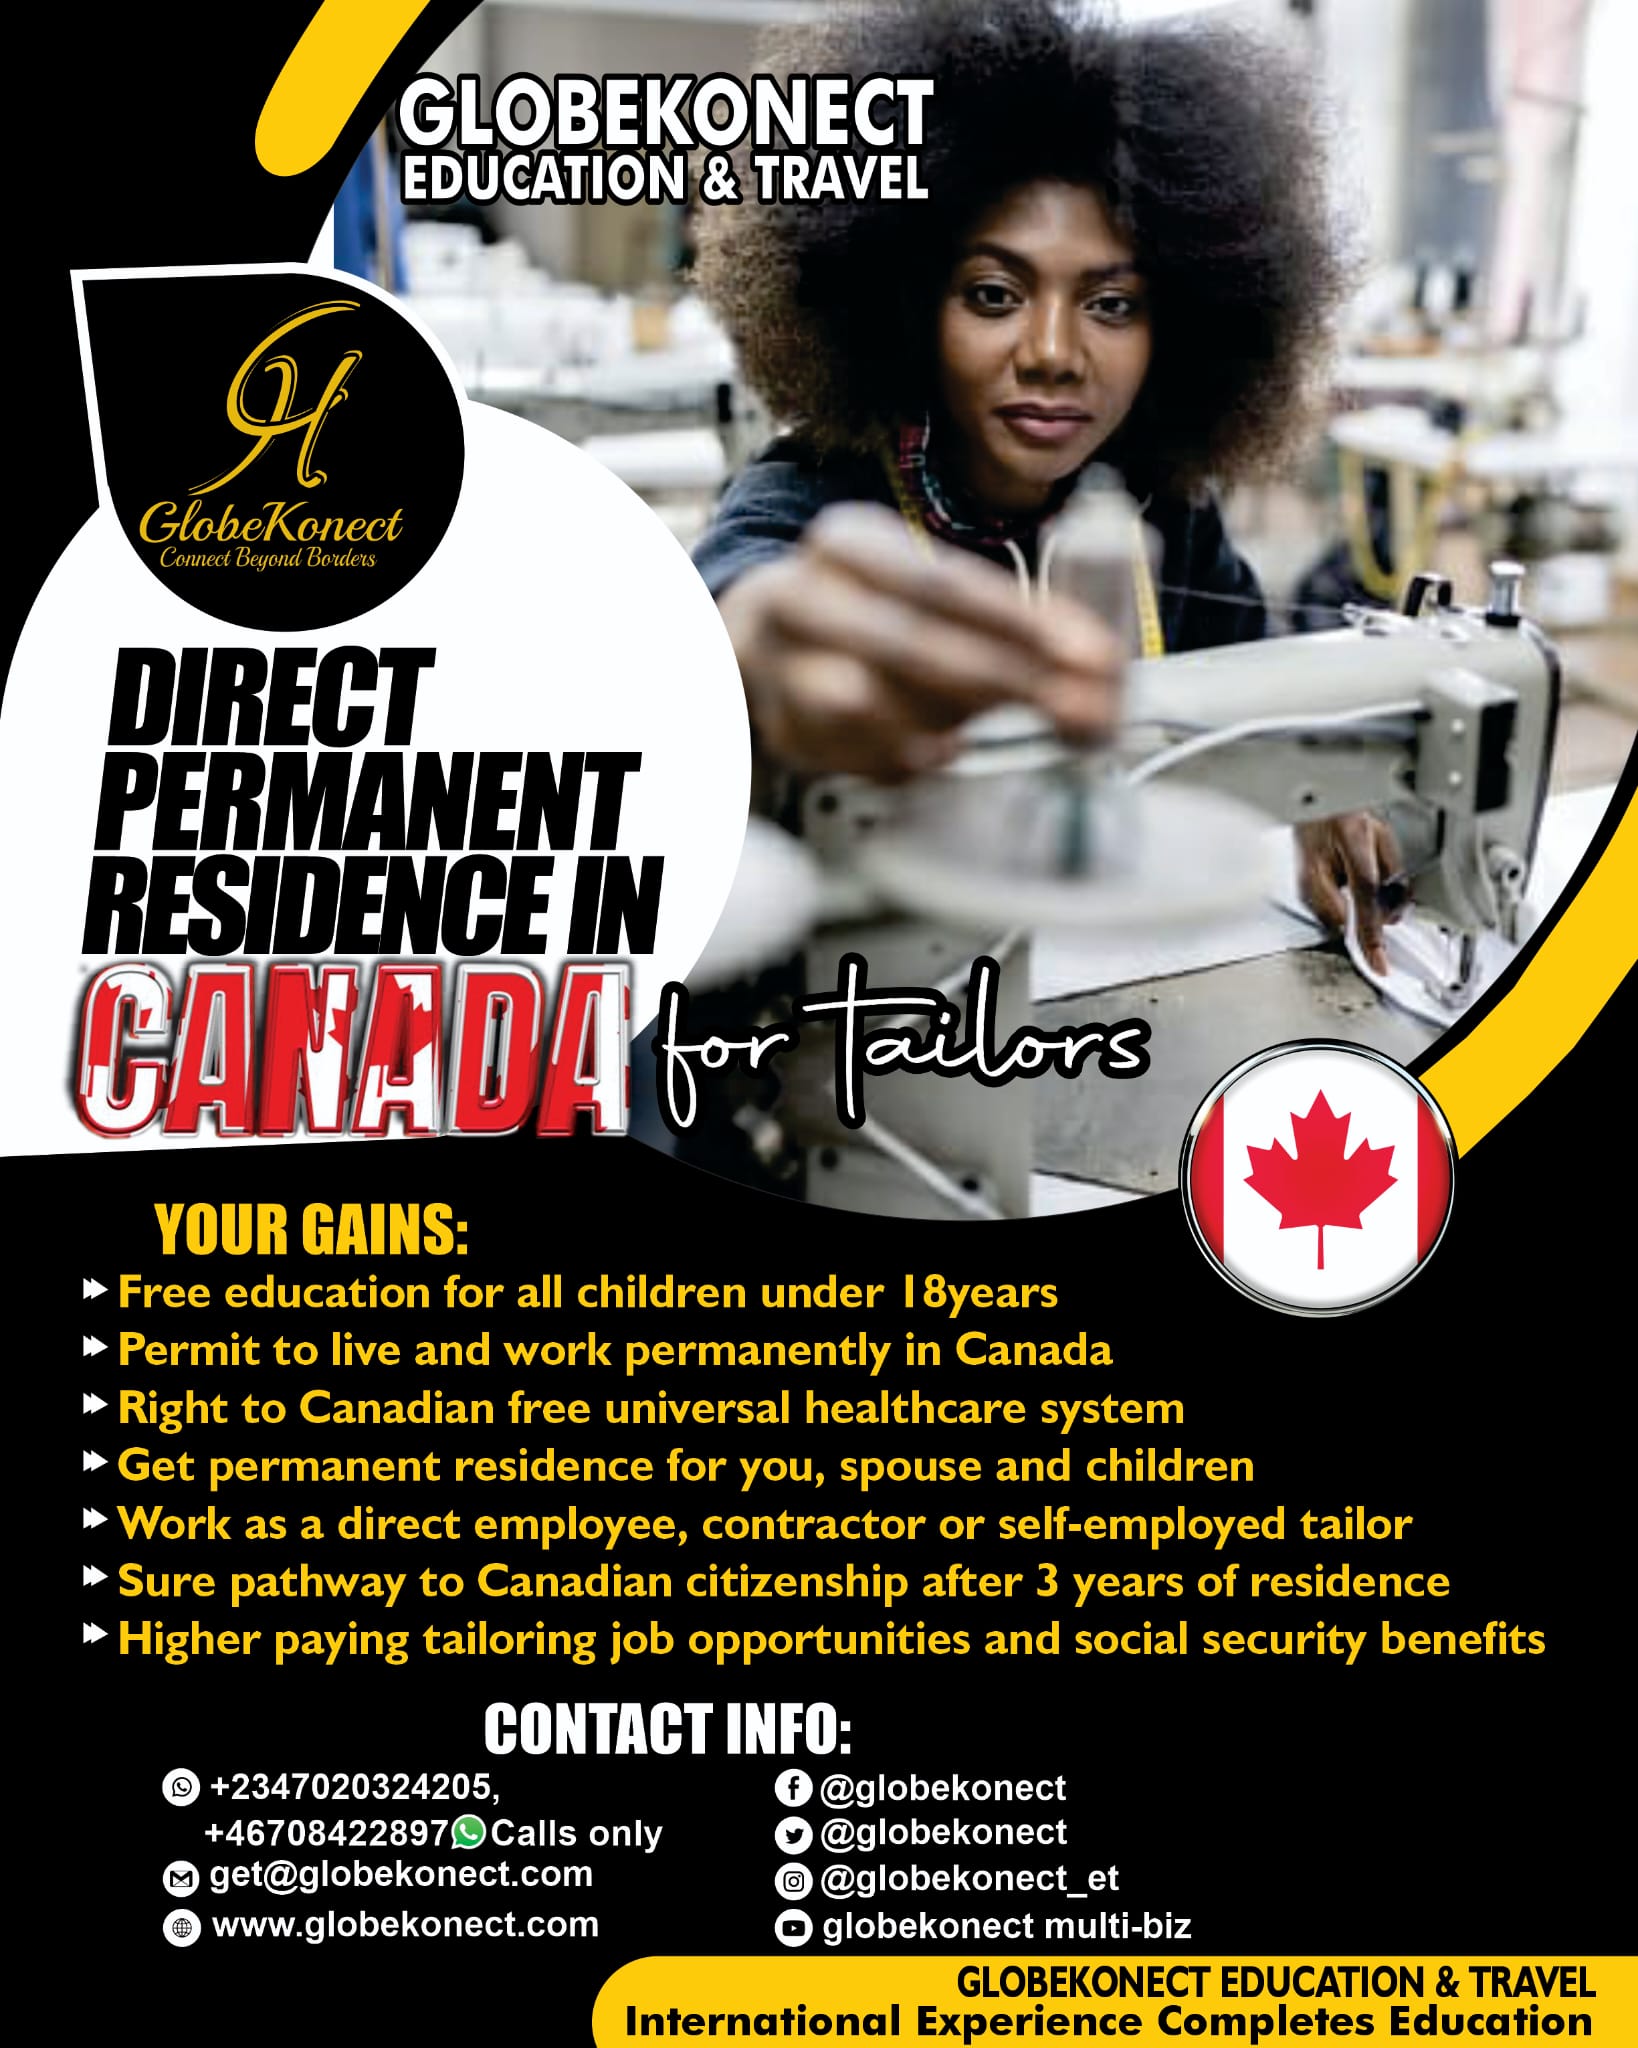 Direct Permanent Residence in Canada for Tailors